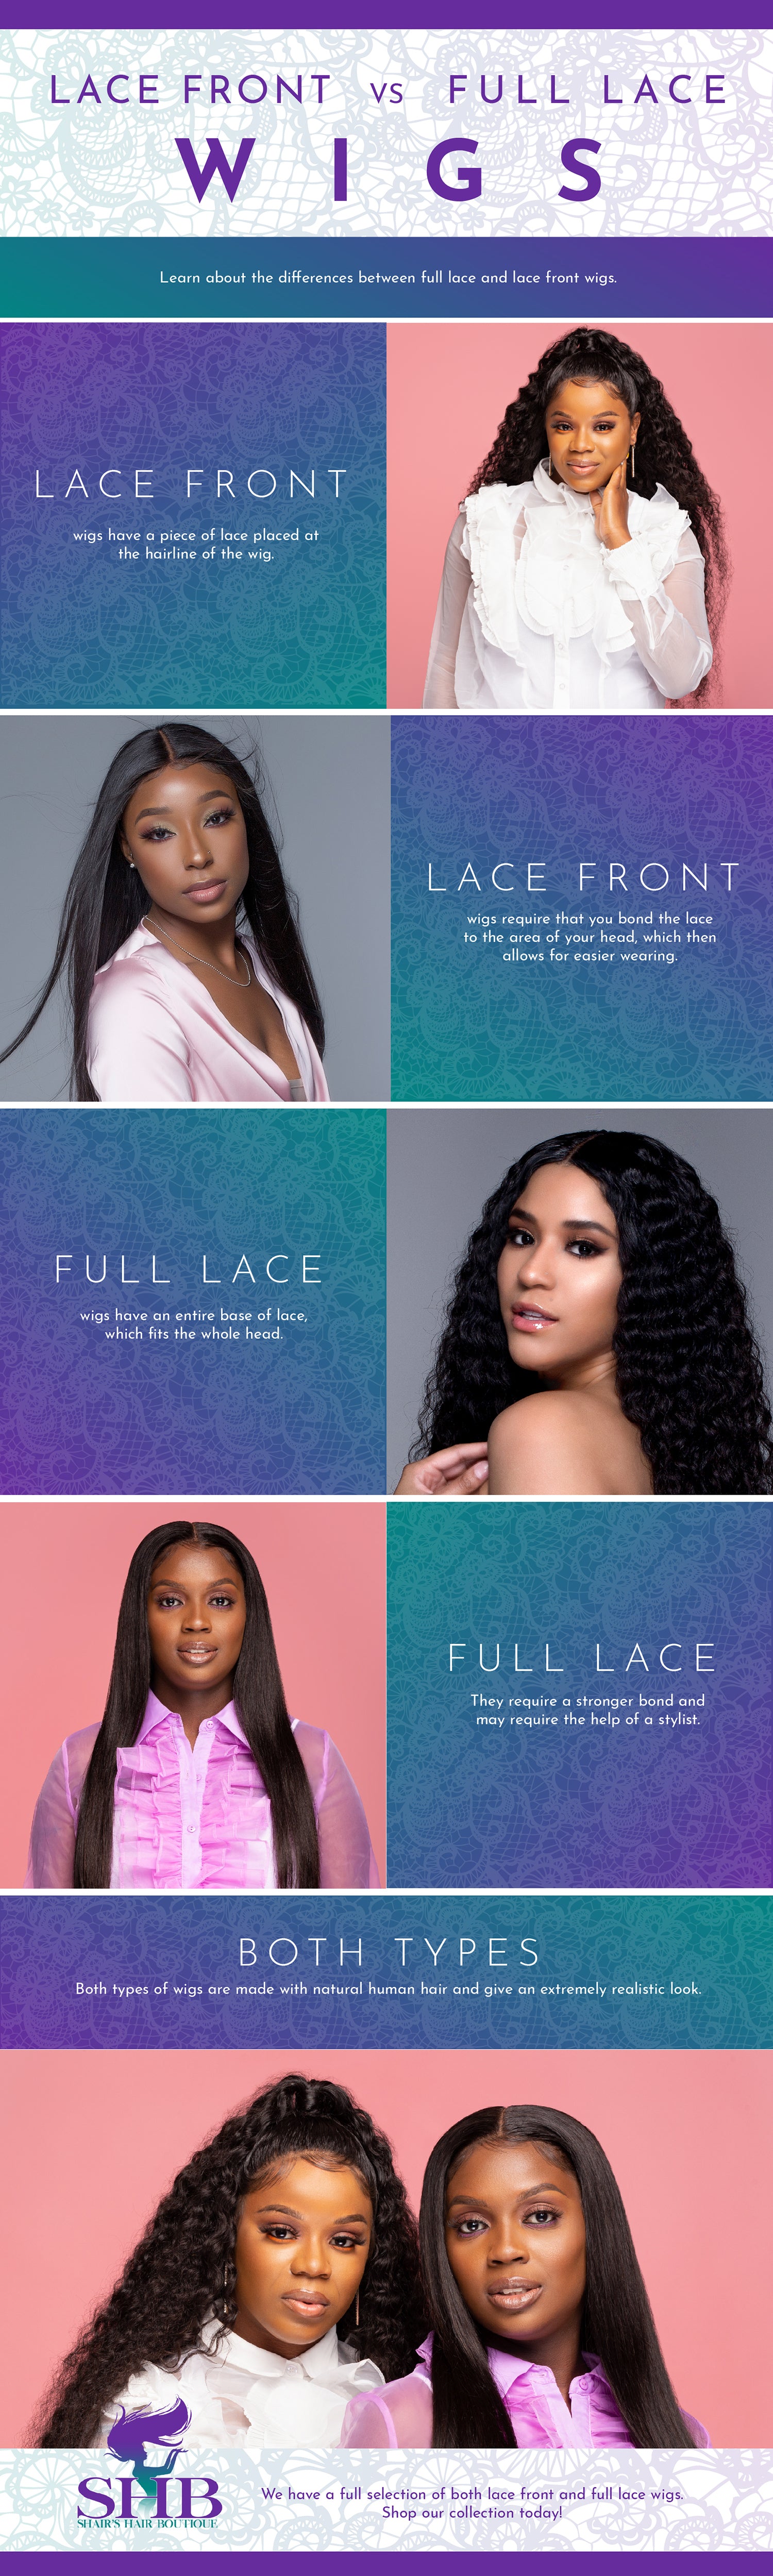 The Difference Between A Lace Front vs Full Lace Wig – Shari's